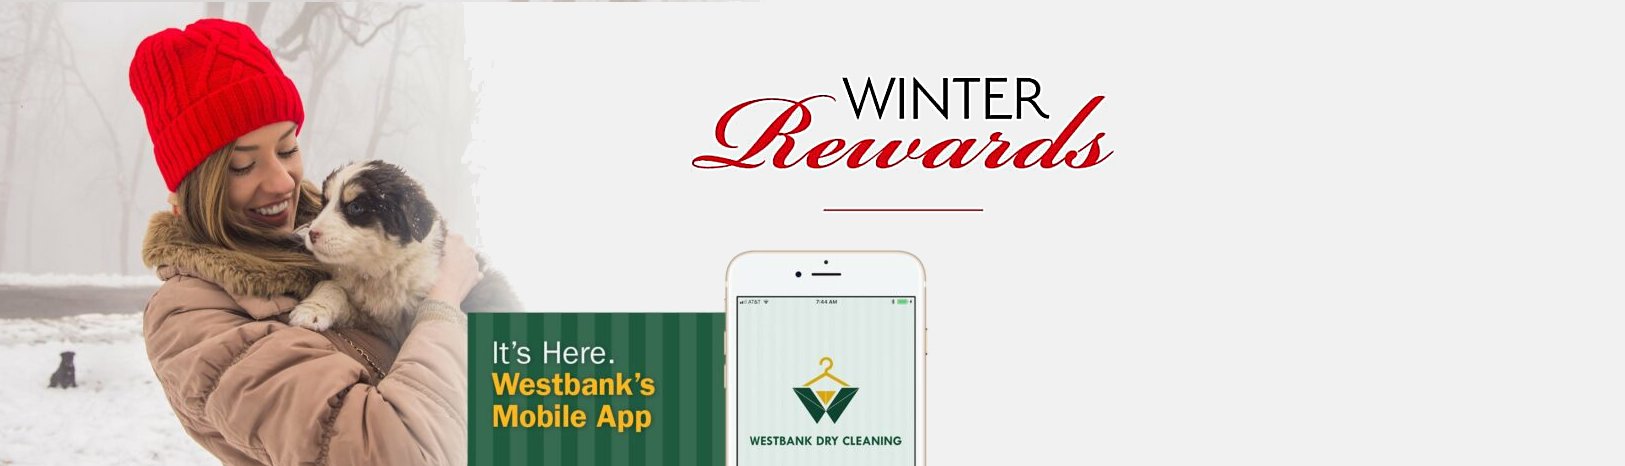 Westbank Dry Cleaning Winter Theme